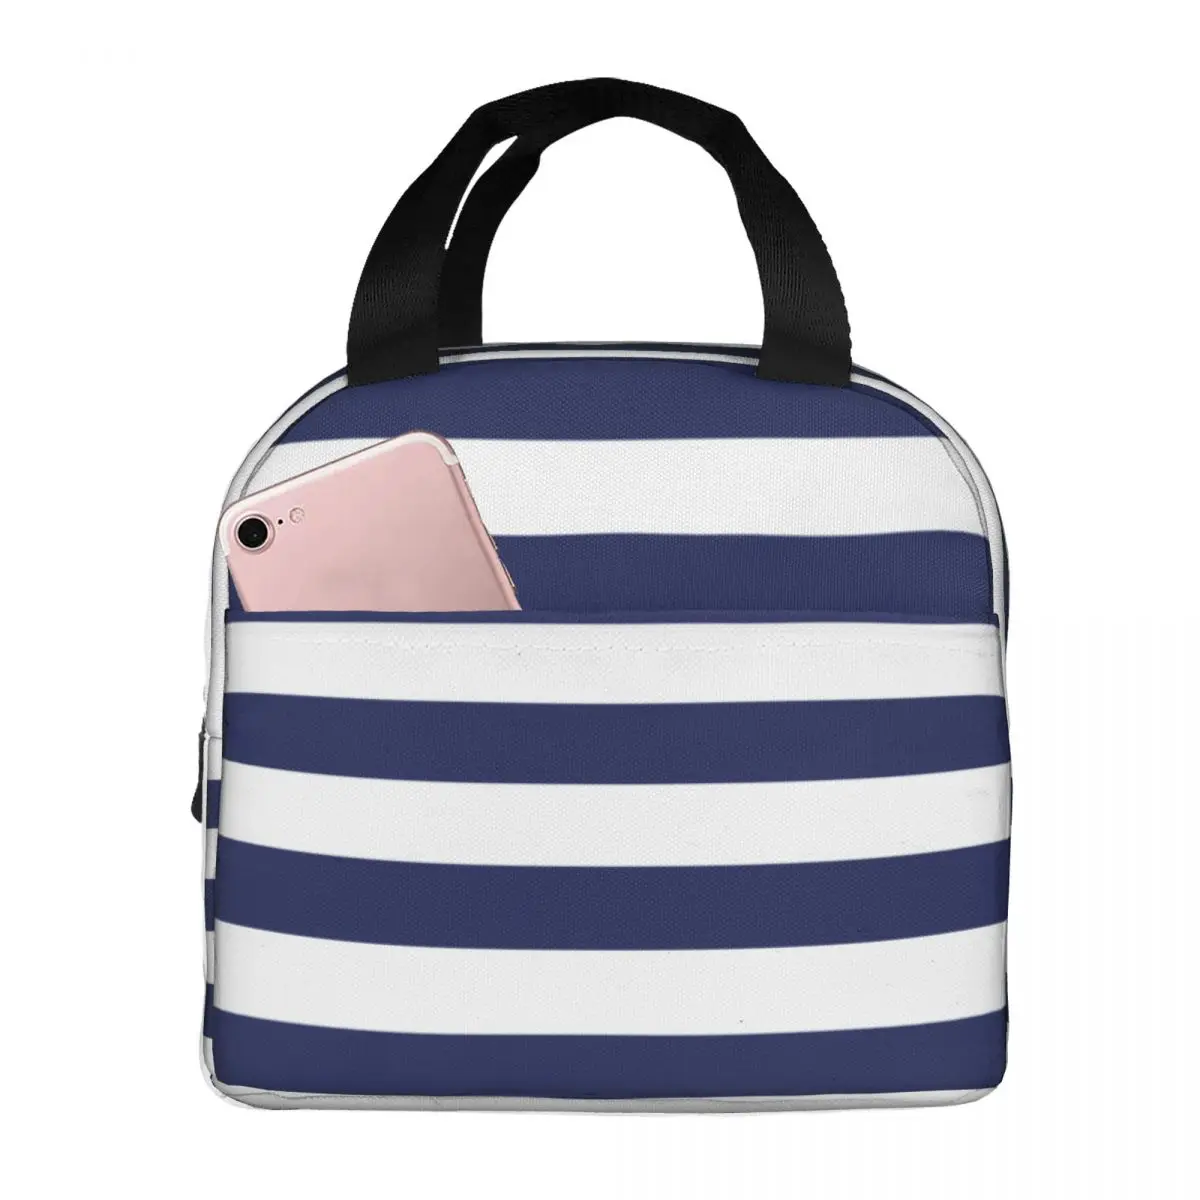 Navy Blue And White Stripes Lunch Bag Portable Insulated Canvas Cooler Bag Thermal Cold Food Picnic Tote for Women Girl